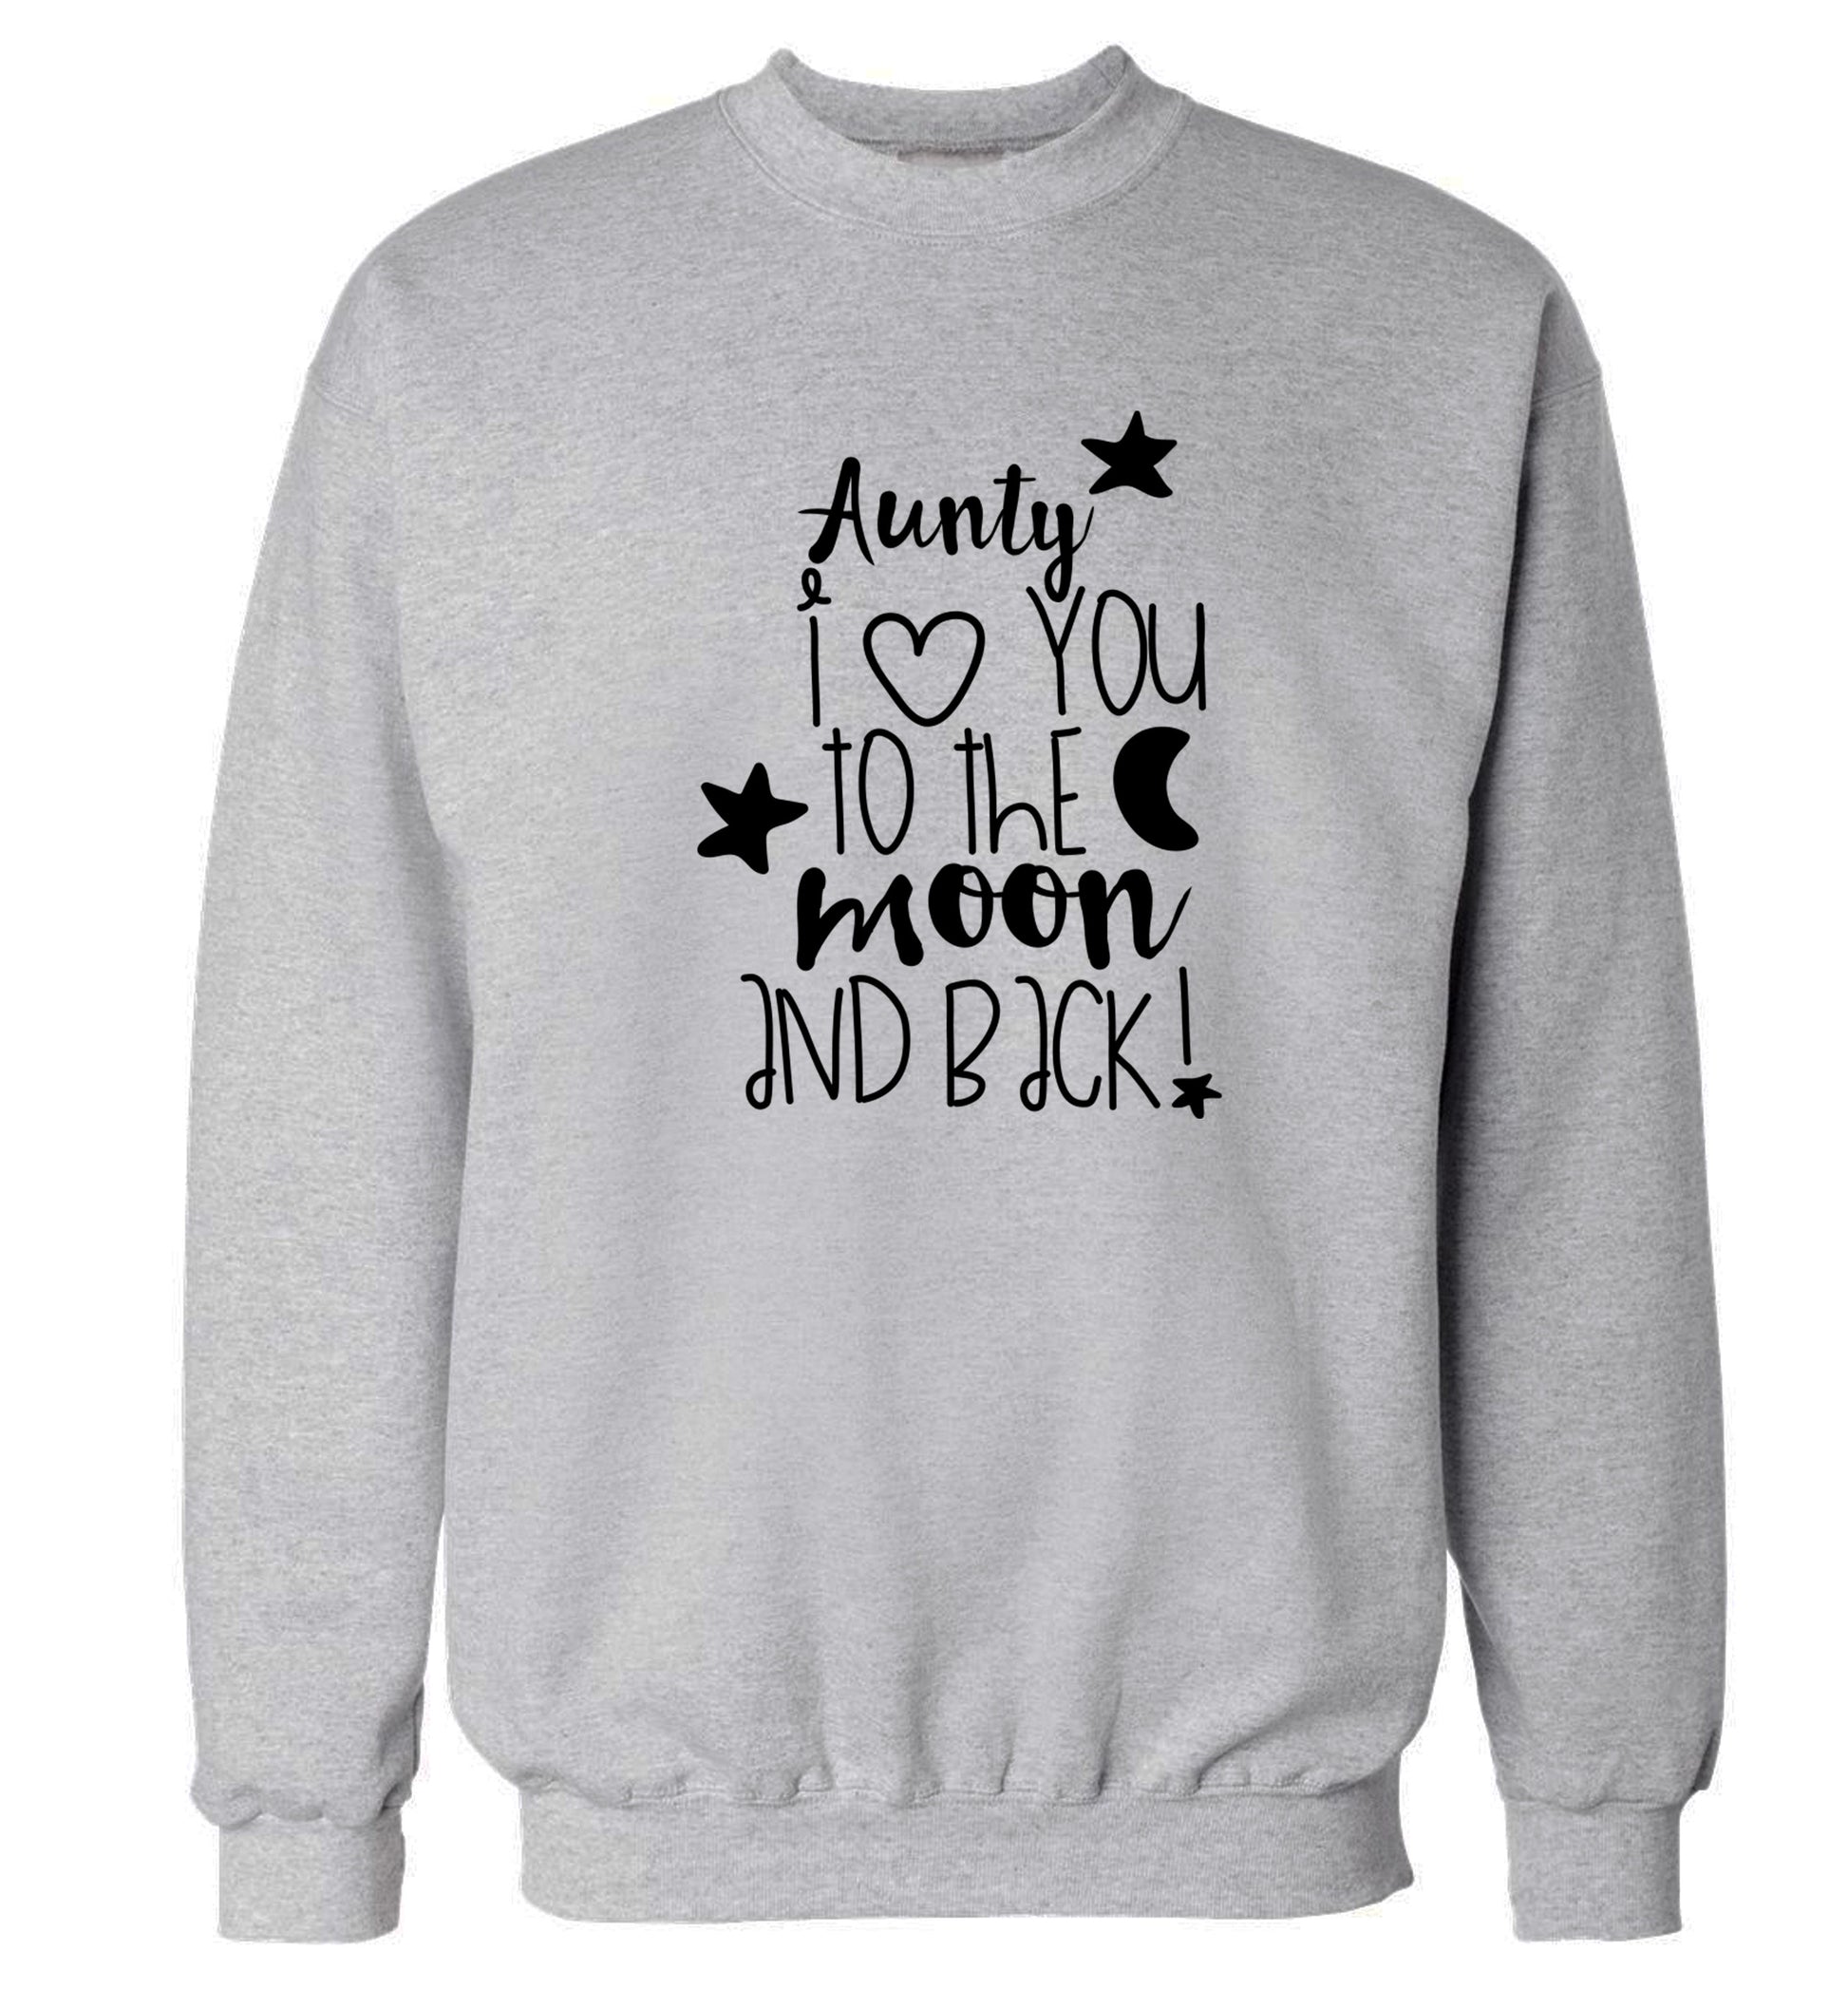 Aunty I love you to the moon and back Adult's unisex grey  sweater 2XL